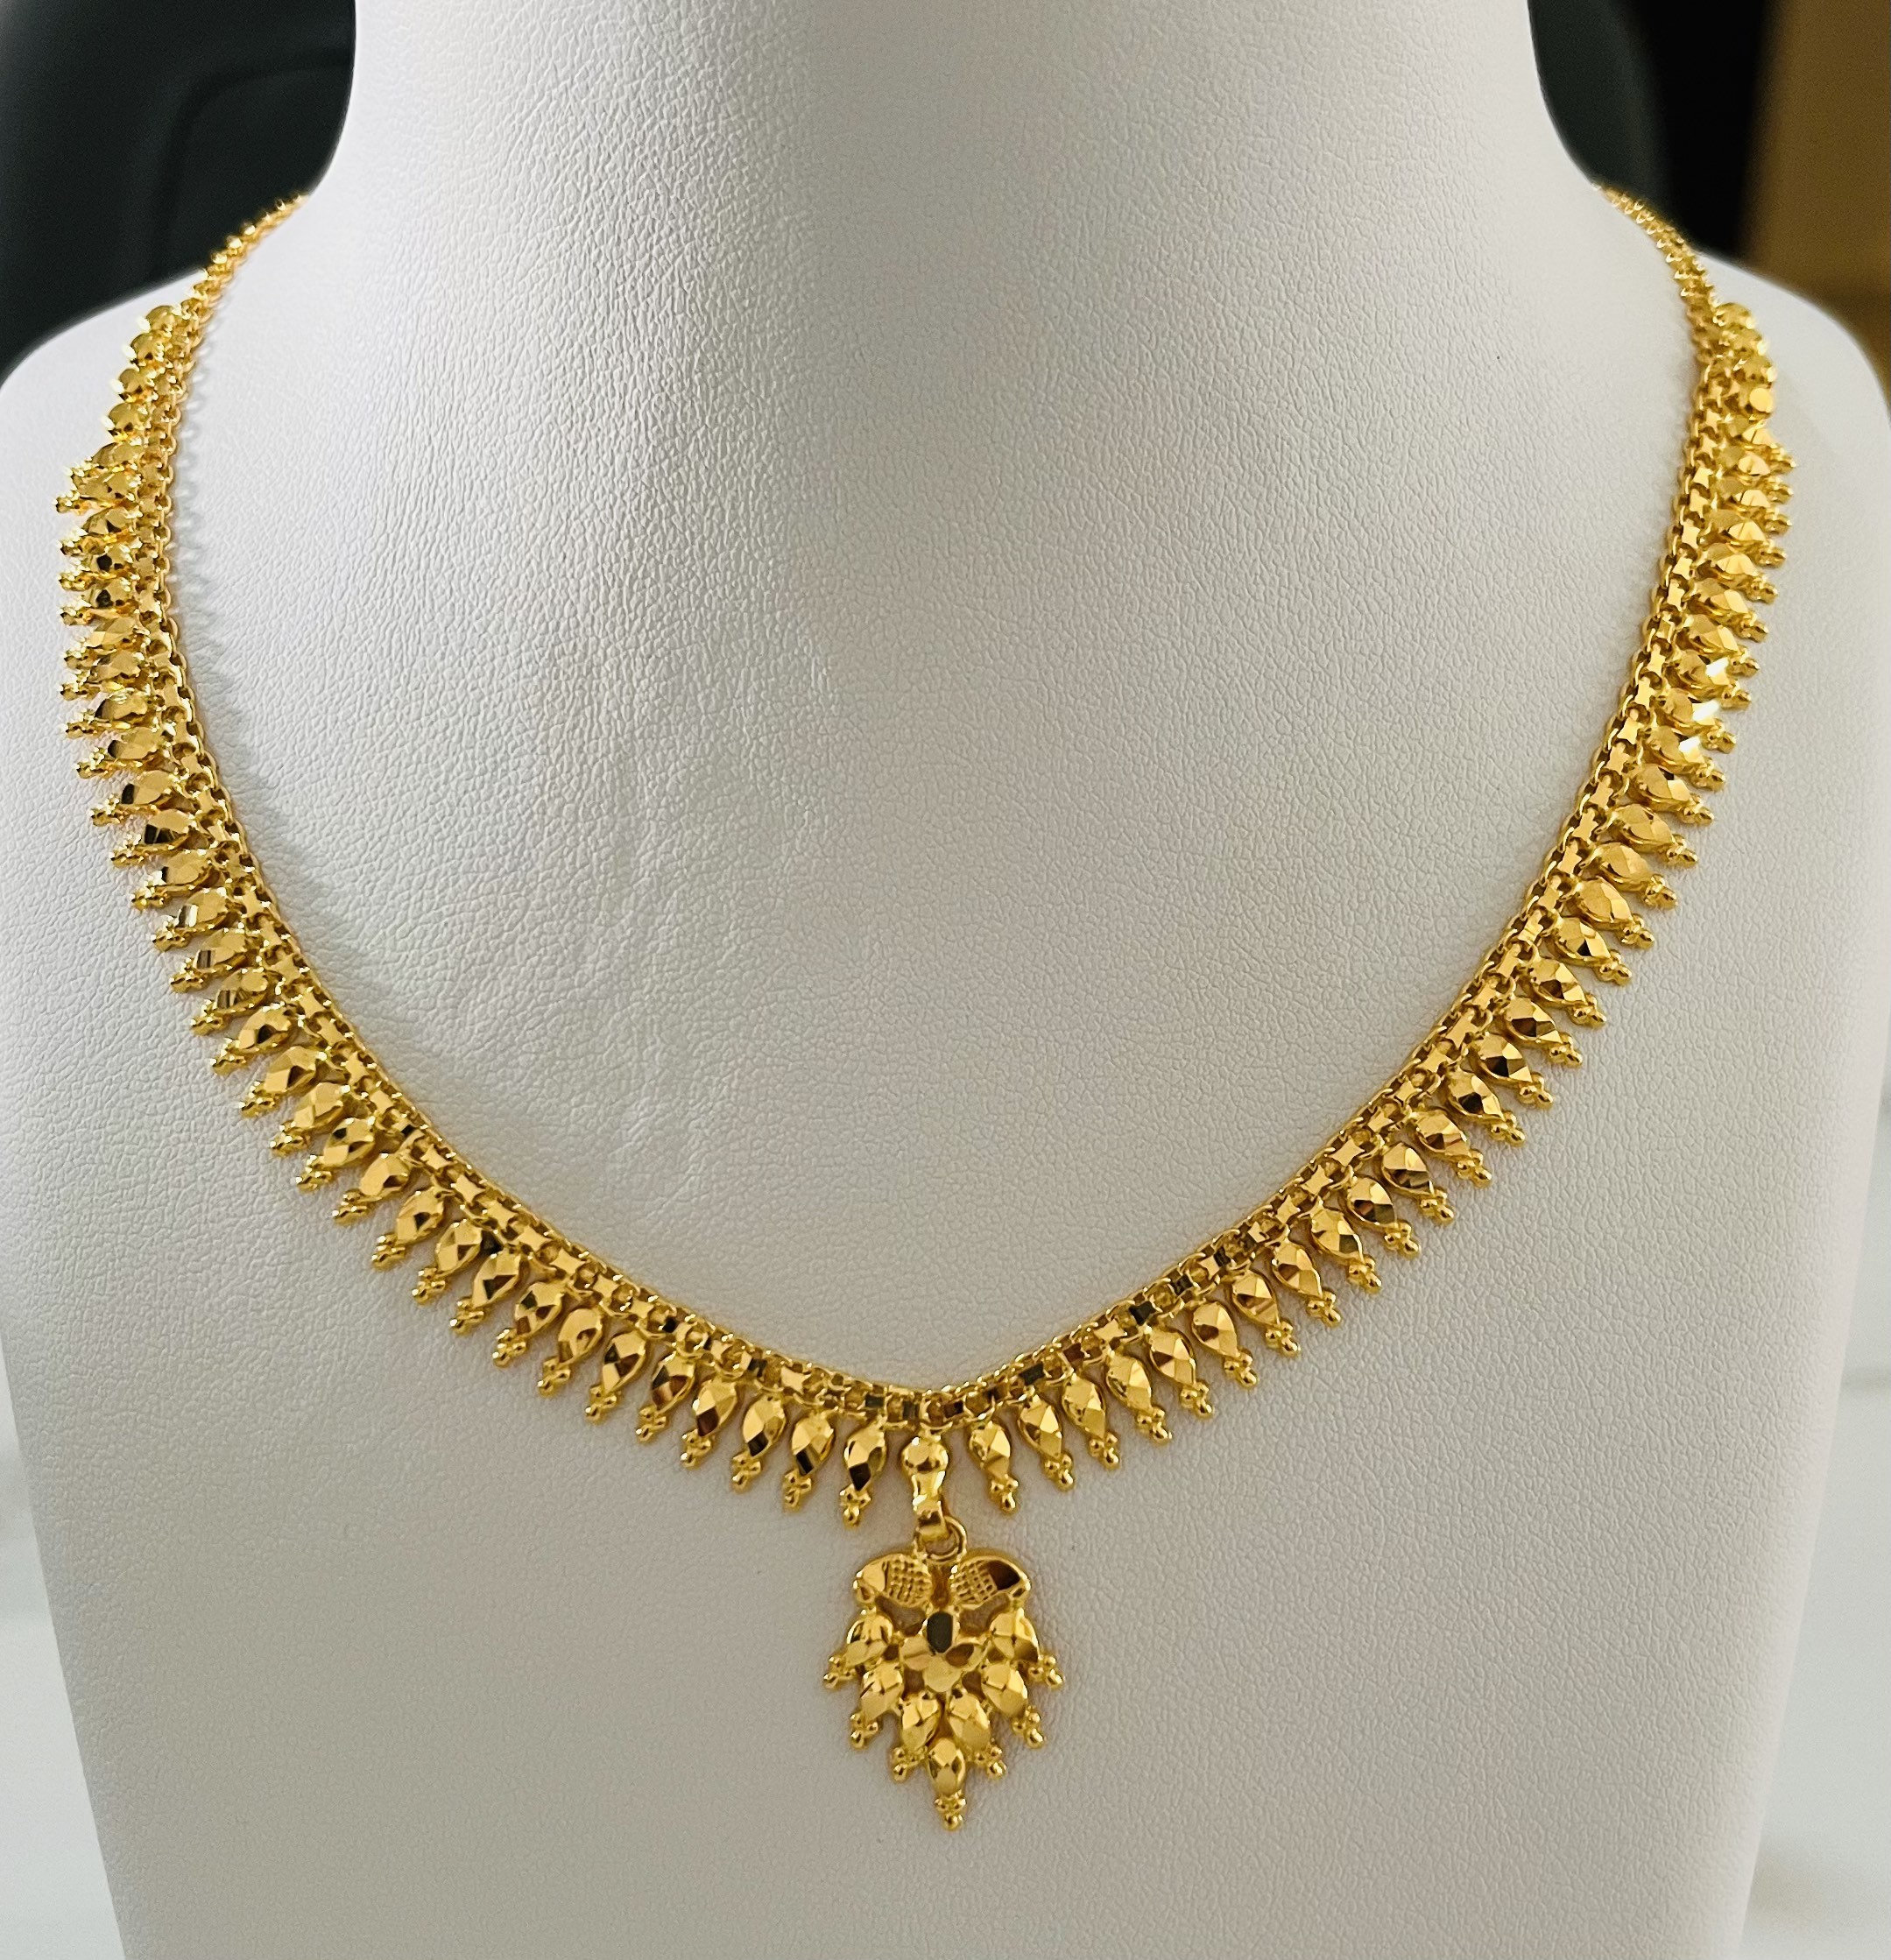 10 Dollar Gold Piece (Indian) Classic Necklace NCM8-10I-C8-N